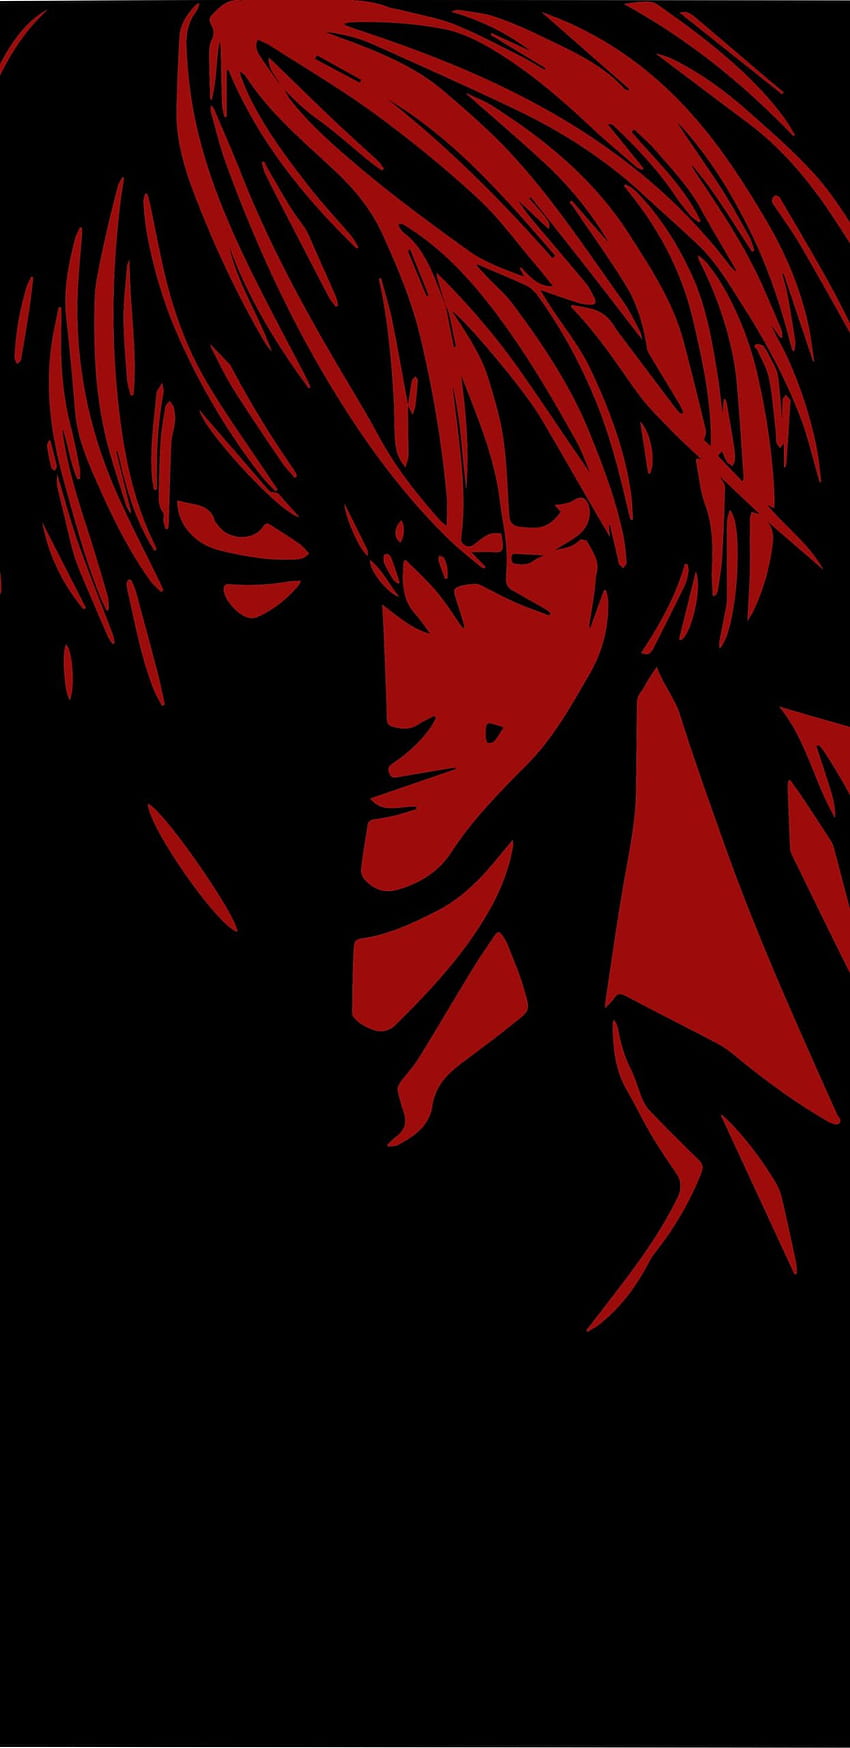 Light Yagami di Death Note Anime 17, Death Note Aesthetic wallpaper ponsel HD